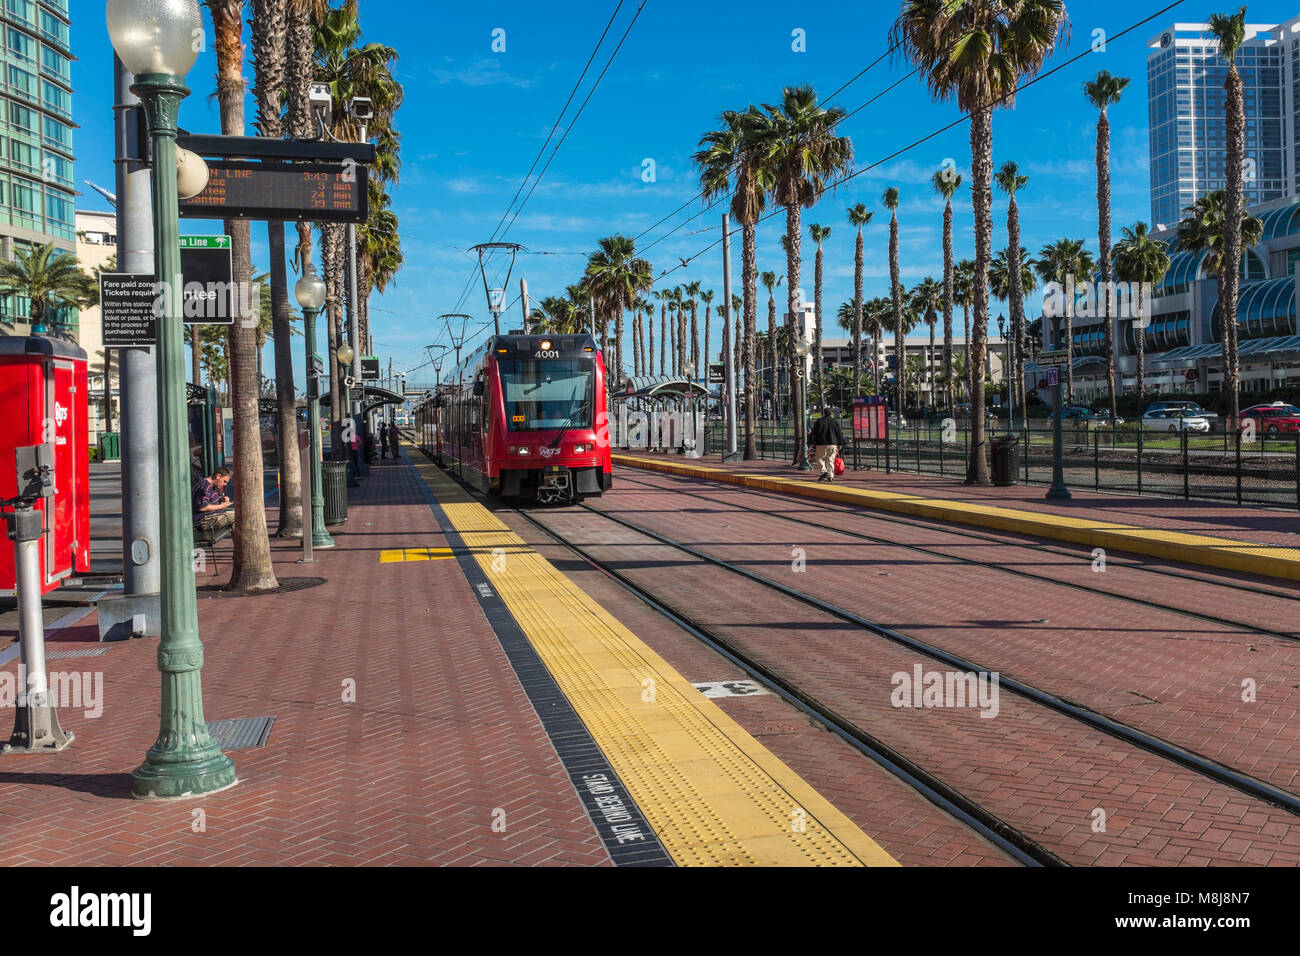 SAN DIEGO, CALIFORNIA, USA - Red Line Trolley approaching the Gaslamp Quarter Station located in the downtown Gaslamp Quarter of the city. Stock Photo